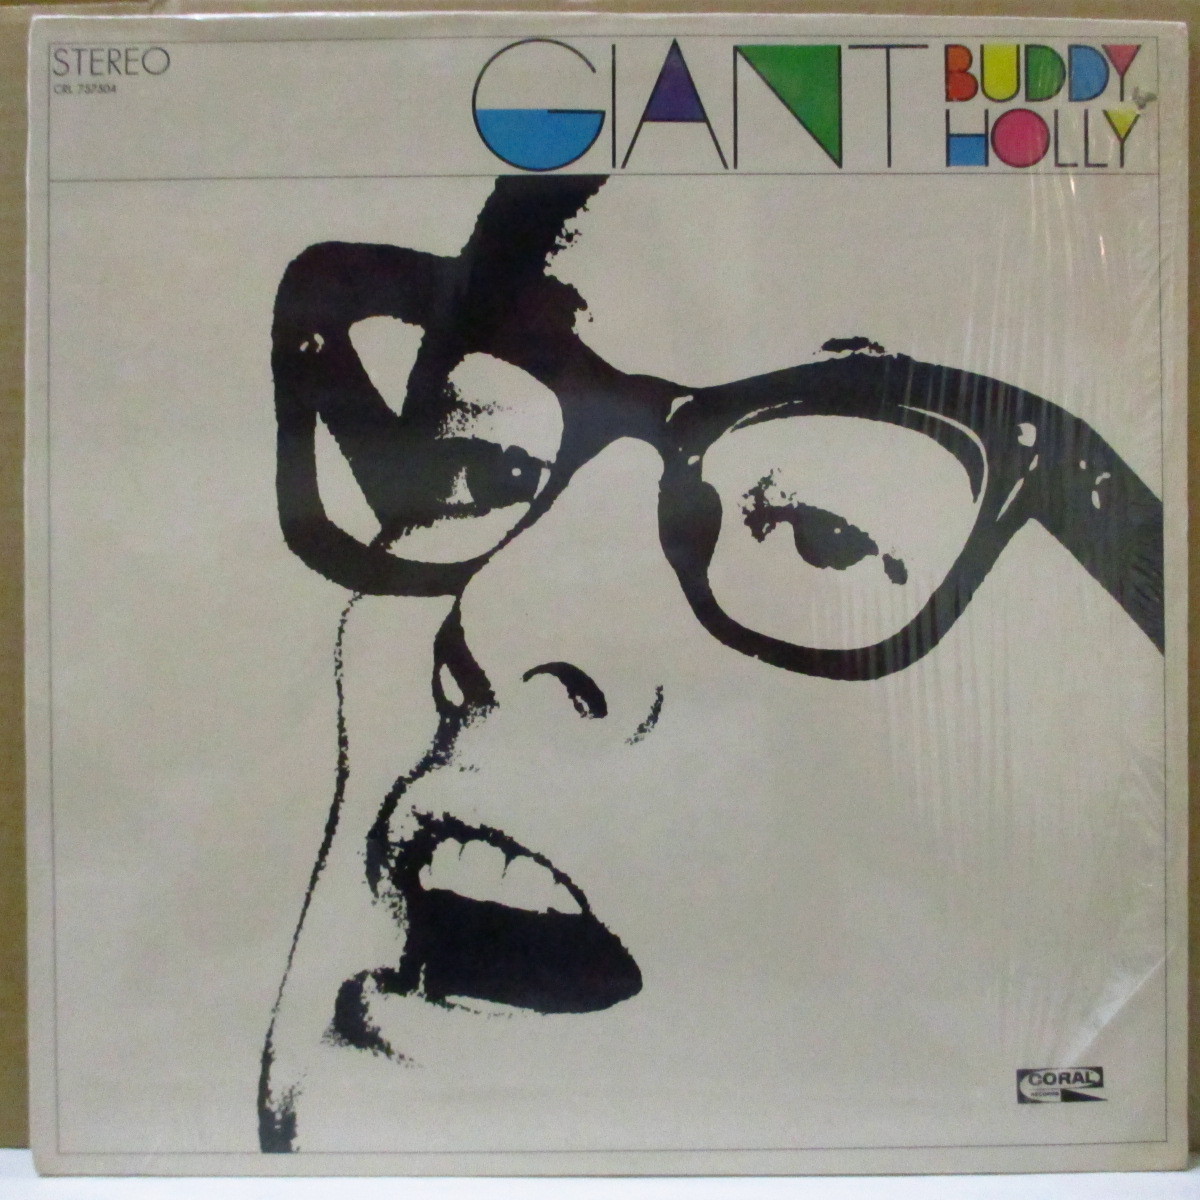 BUDDY HOLLY-Giant (US the first times [MCA credit black * rainbow labe] original * stereo LP)